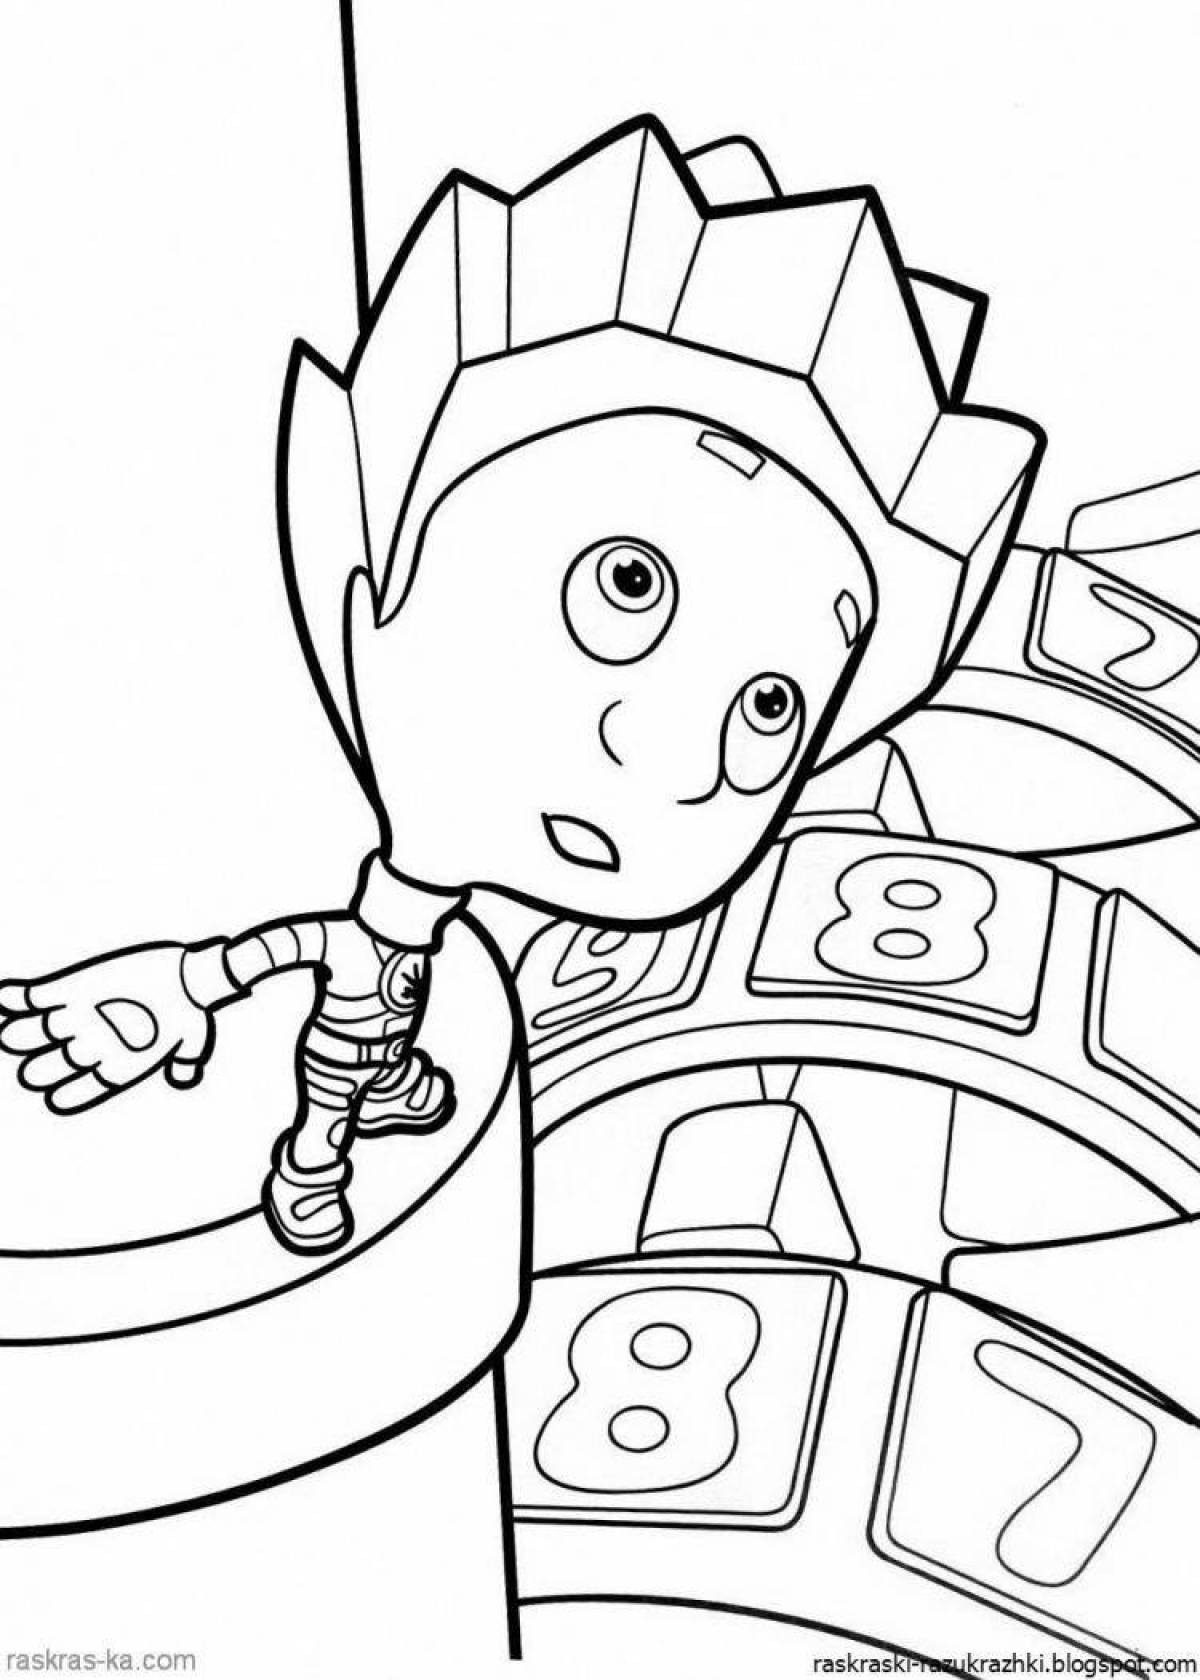 Charming coloring page zero